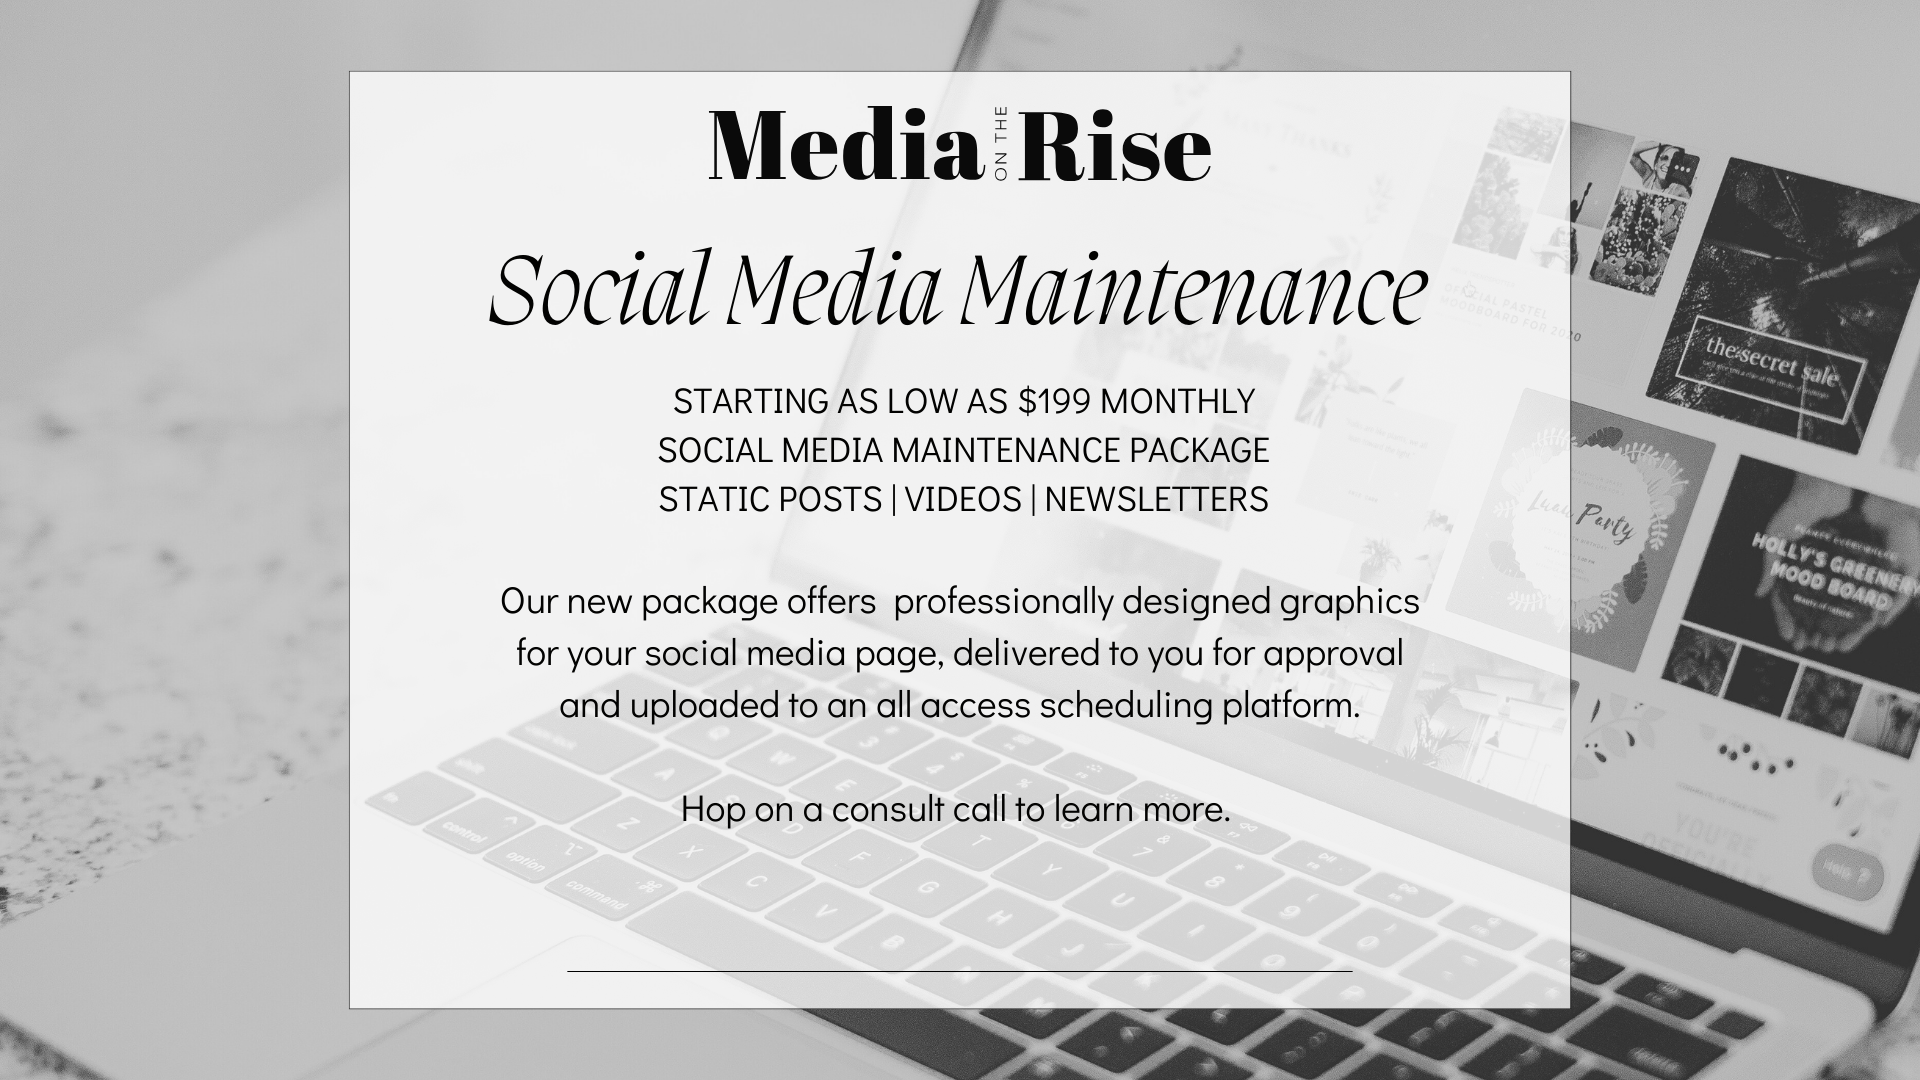 Social Media Maintenance: The AFFORDABLE content creation/social media solution!